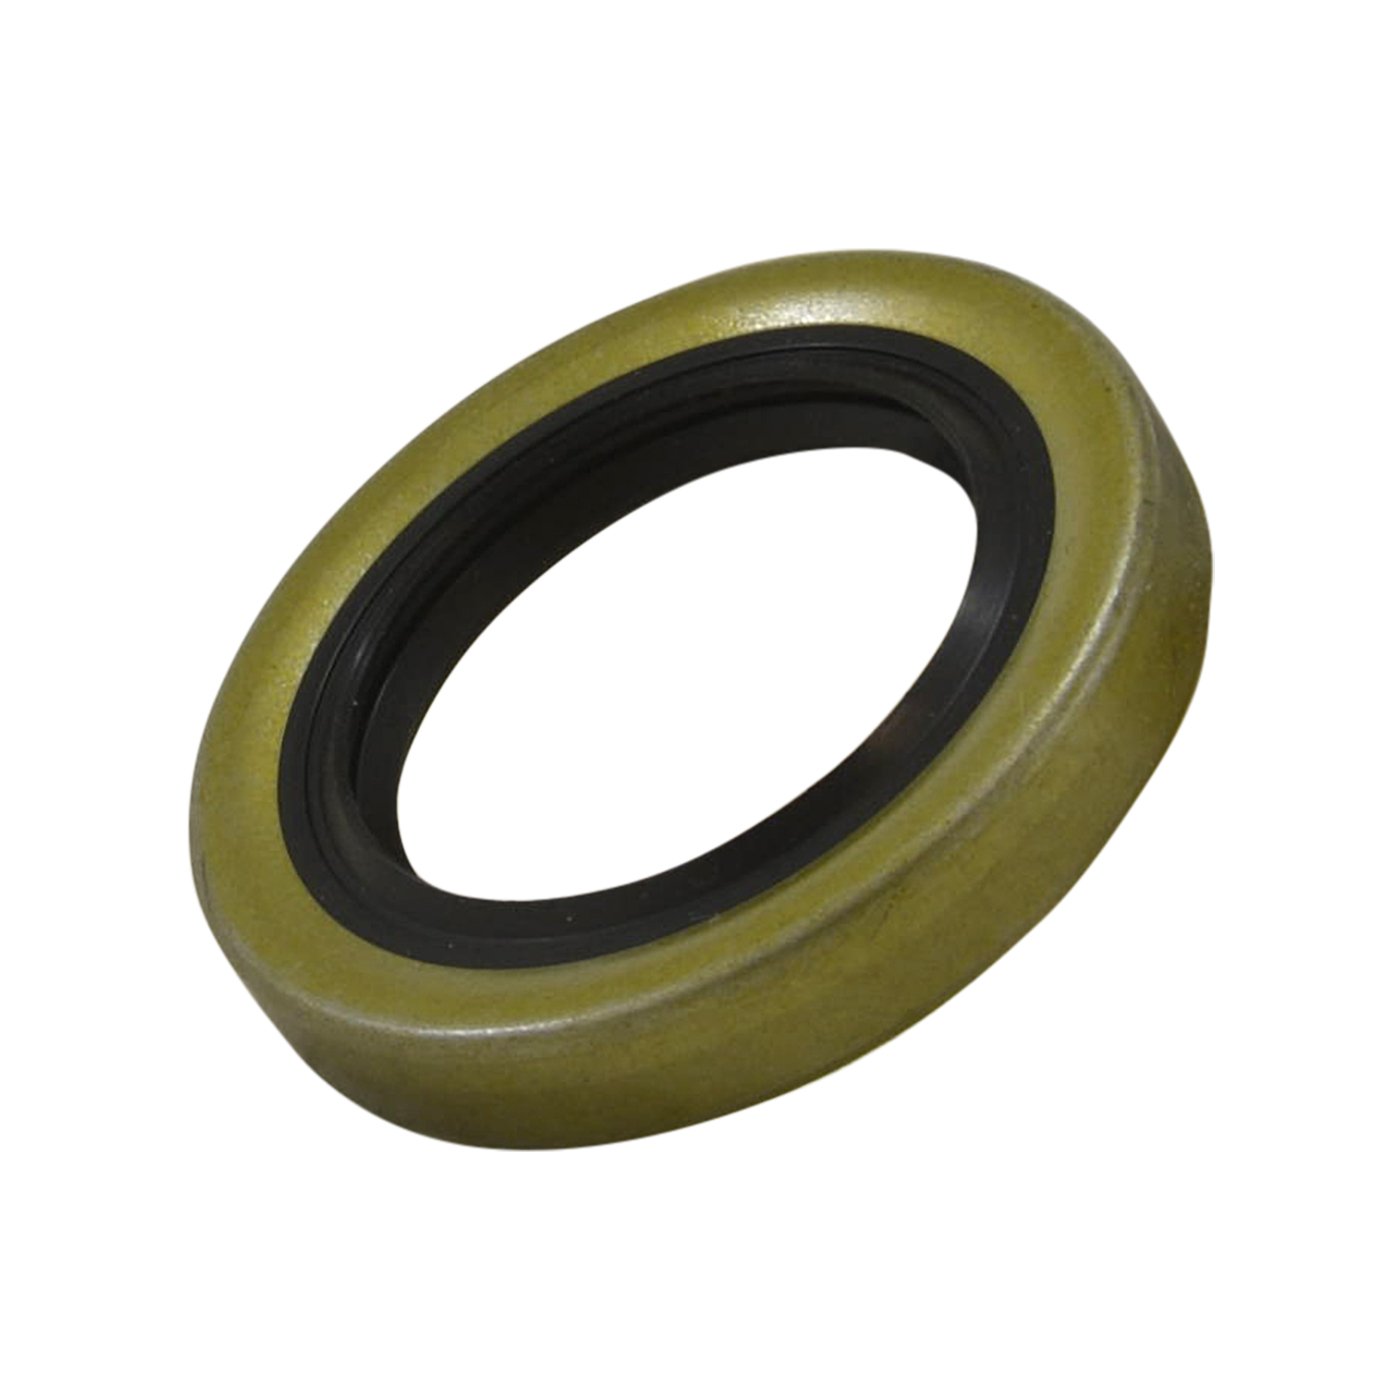 Dana 30 Disconnect Replacement Inner Axle Seal (Use W/30Spline Axles)